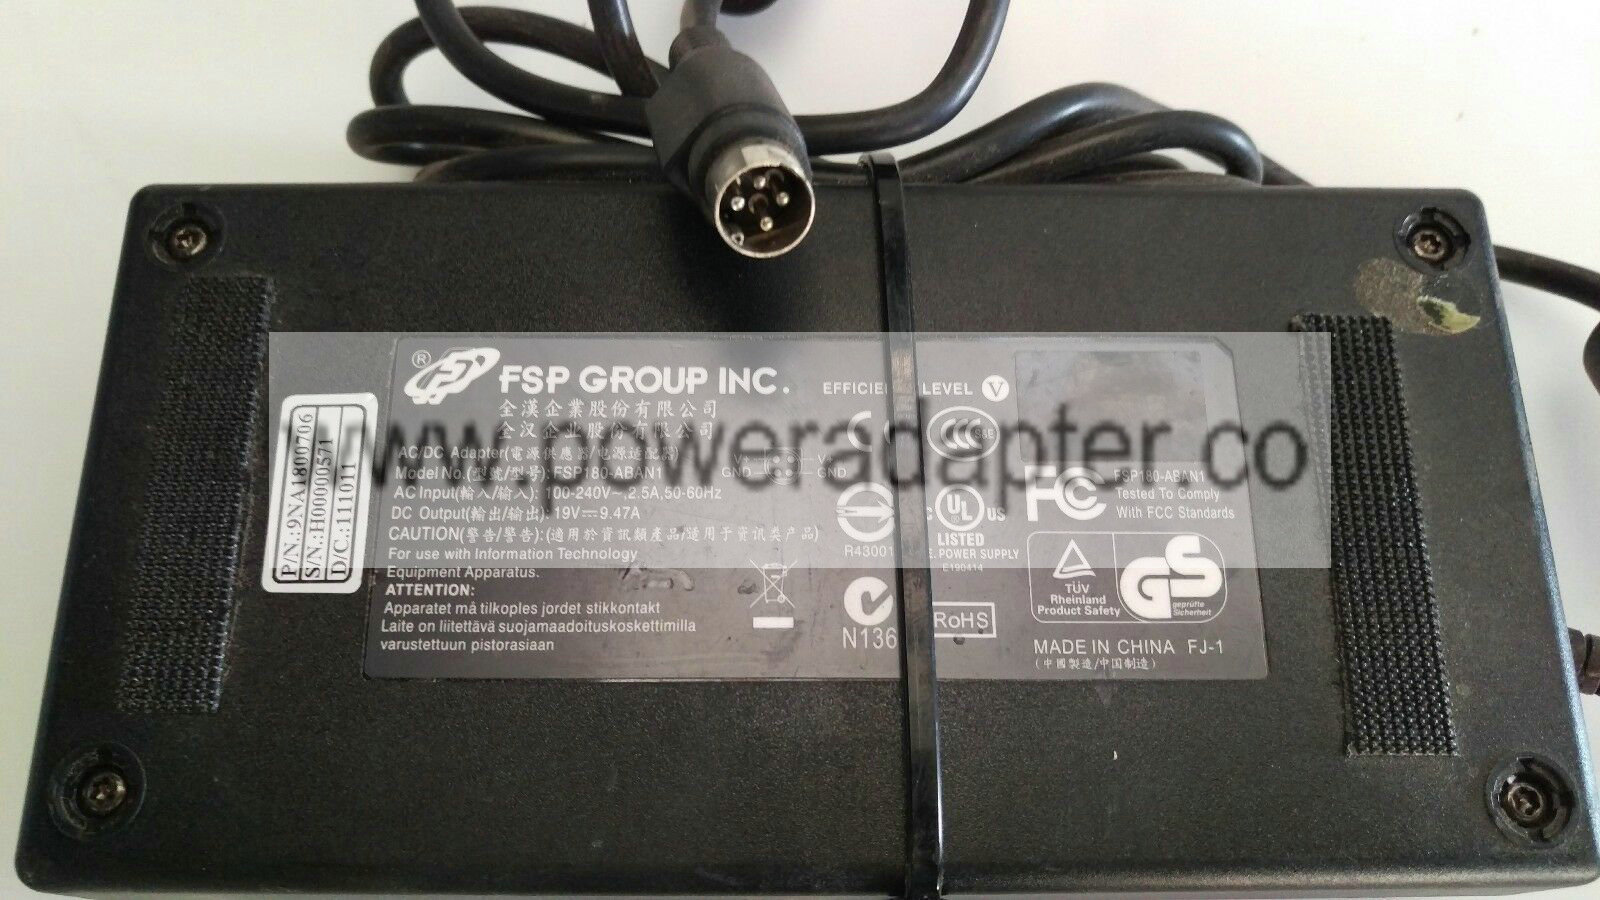 FSP GROUP FSP180-ABAN1 19V 9.47A AC/DC Power Adapter For PAR M7125-01 9NA1800706 UP FOR SALE IS A FSP GROUP FSP180-AB - Click Image to Close